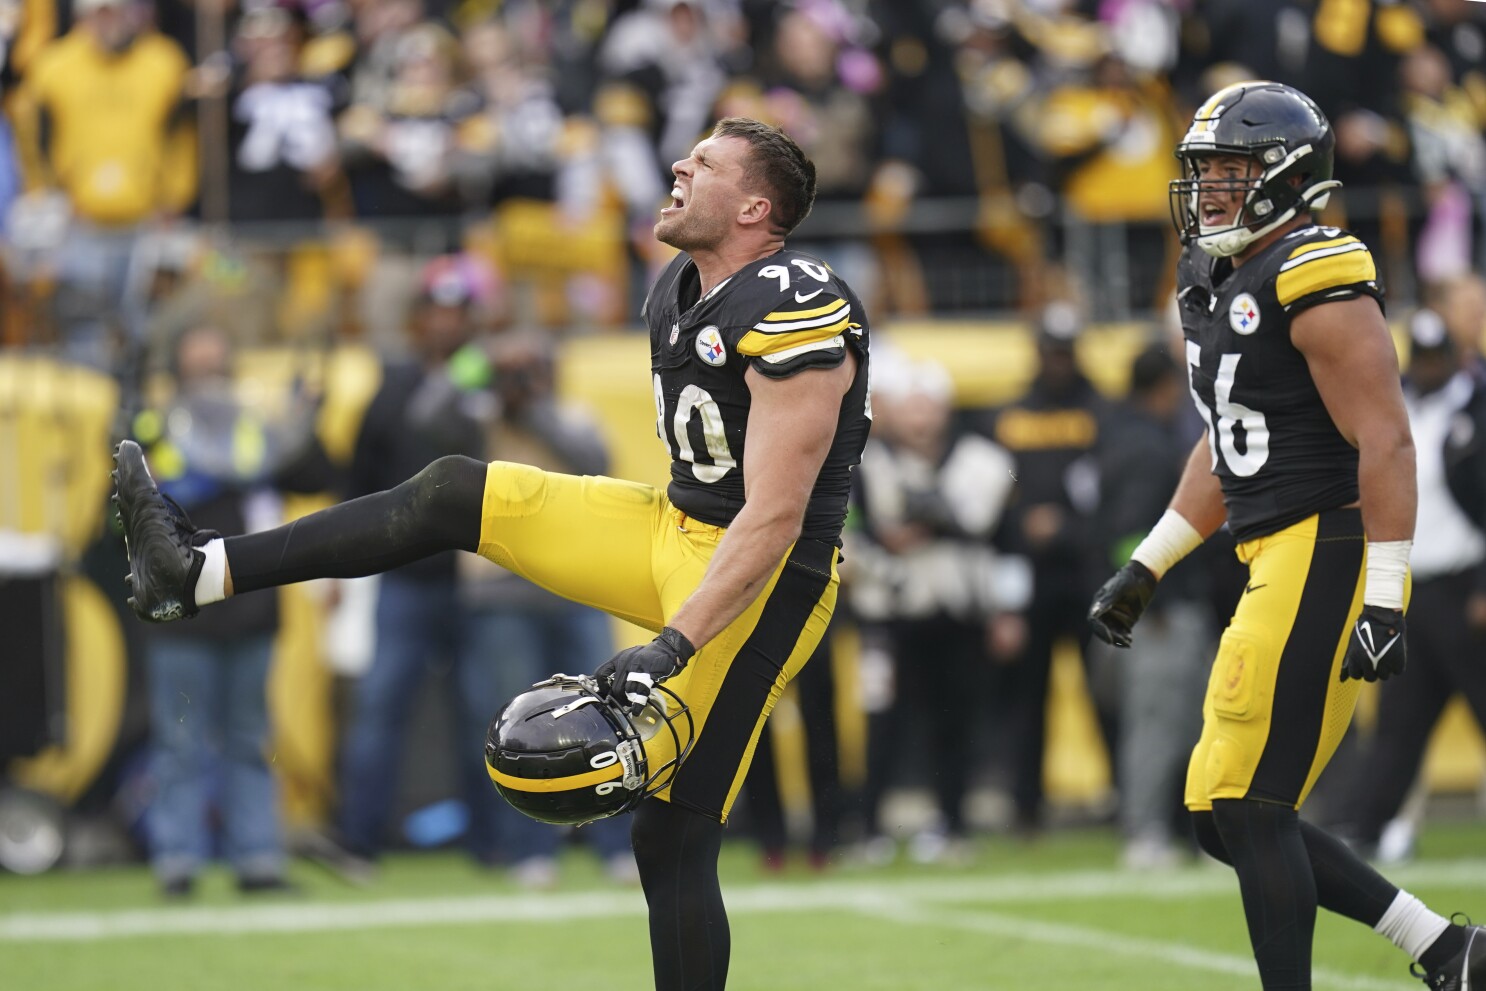 BLOCK PARTY WATCH: - Pittsburgh Steelers